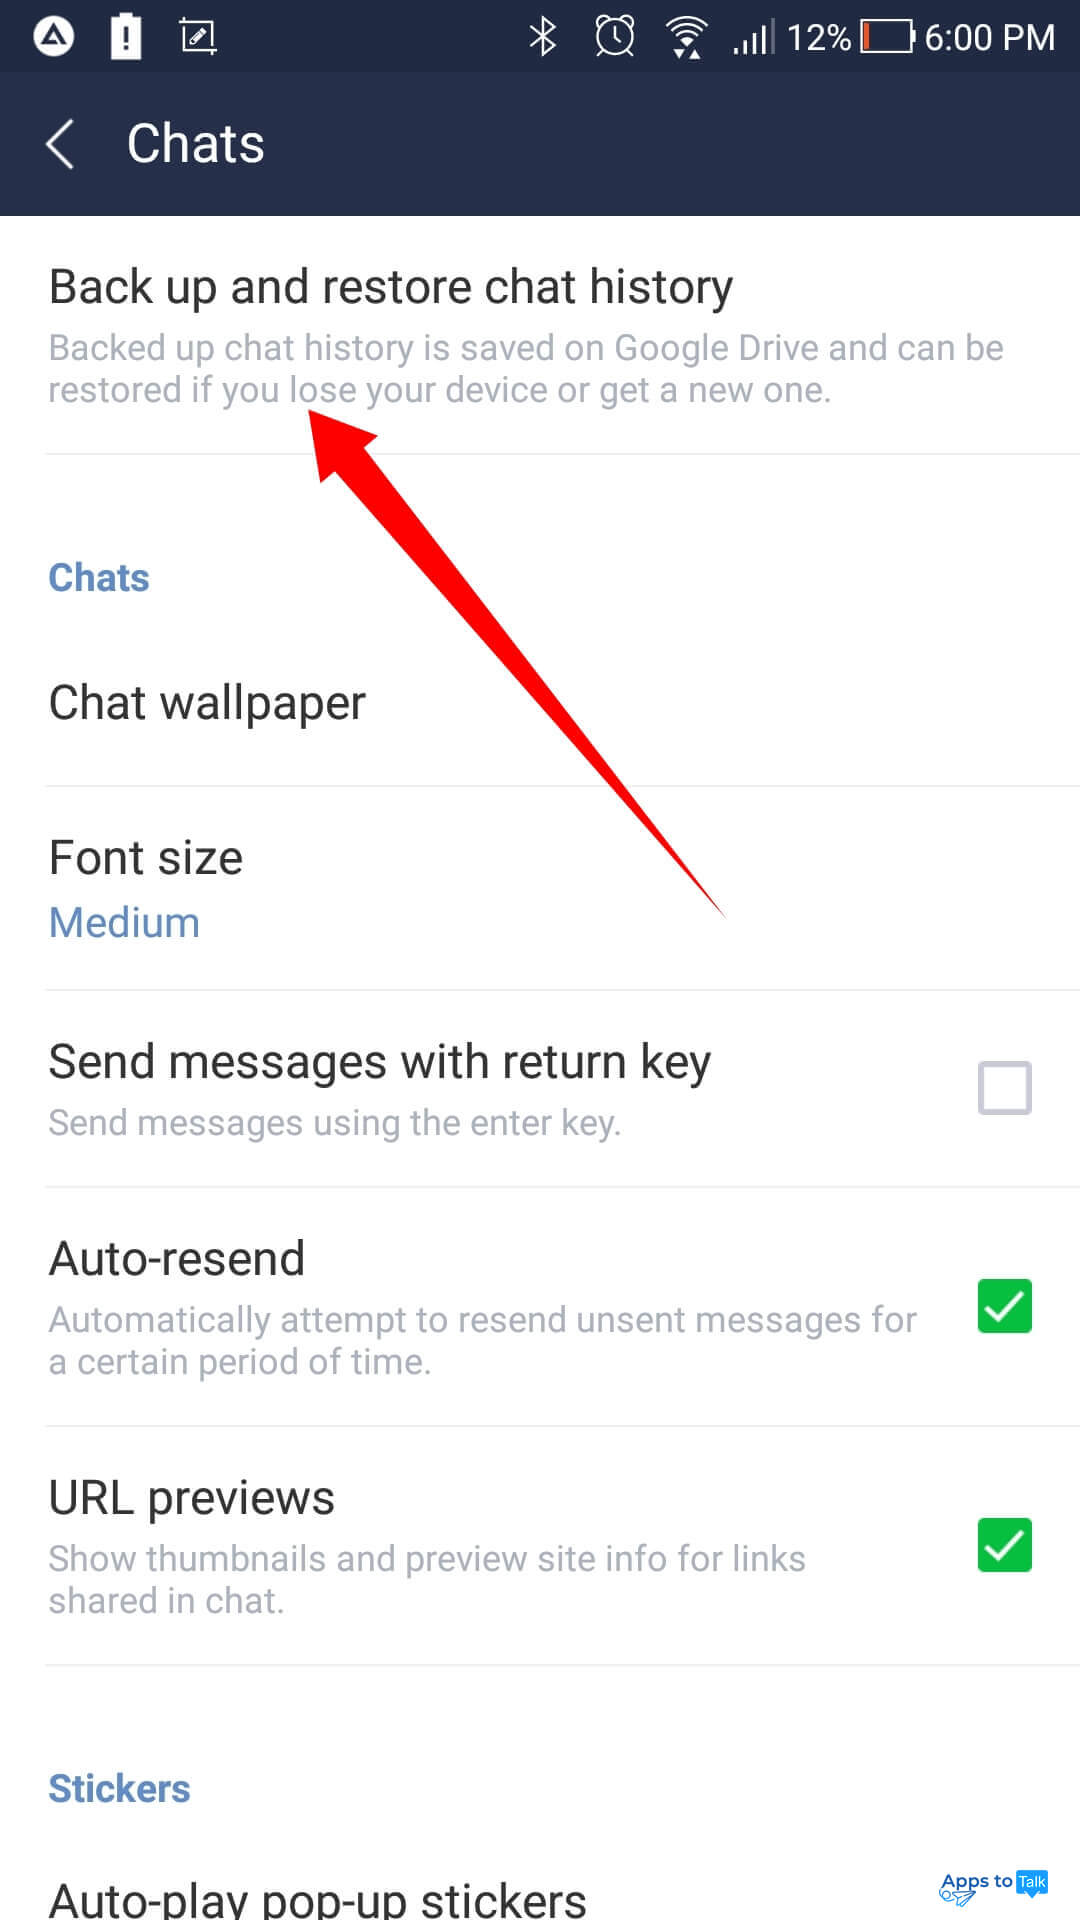 How to sign out from an active Line account on Android and iOS